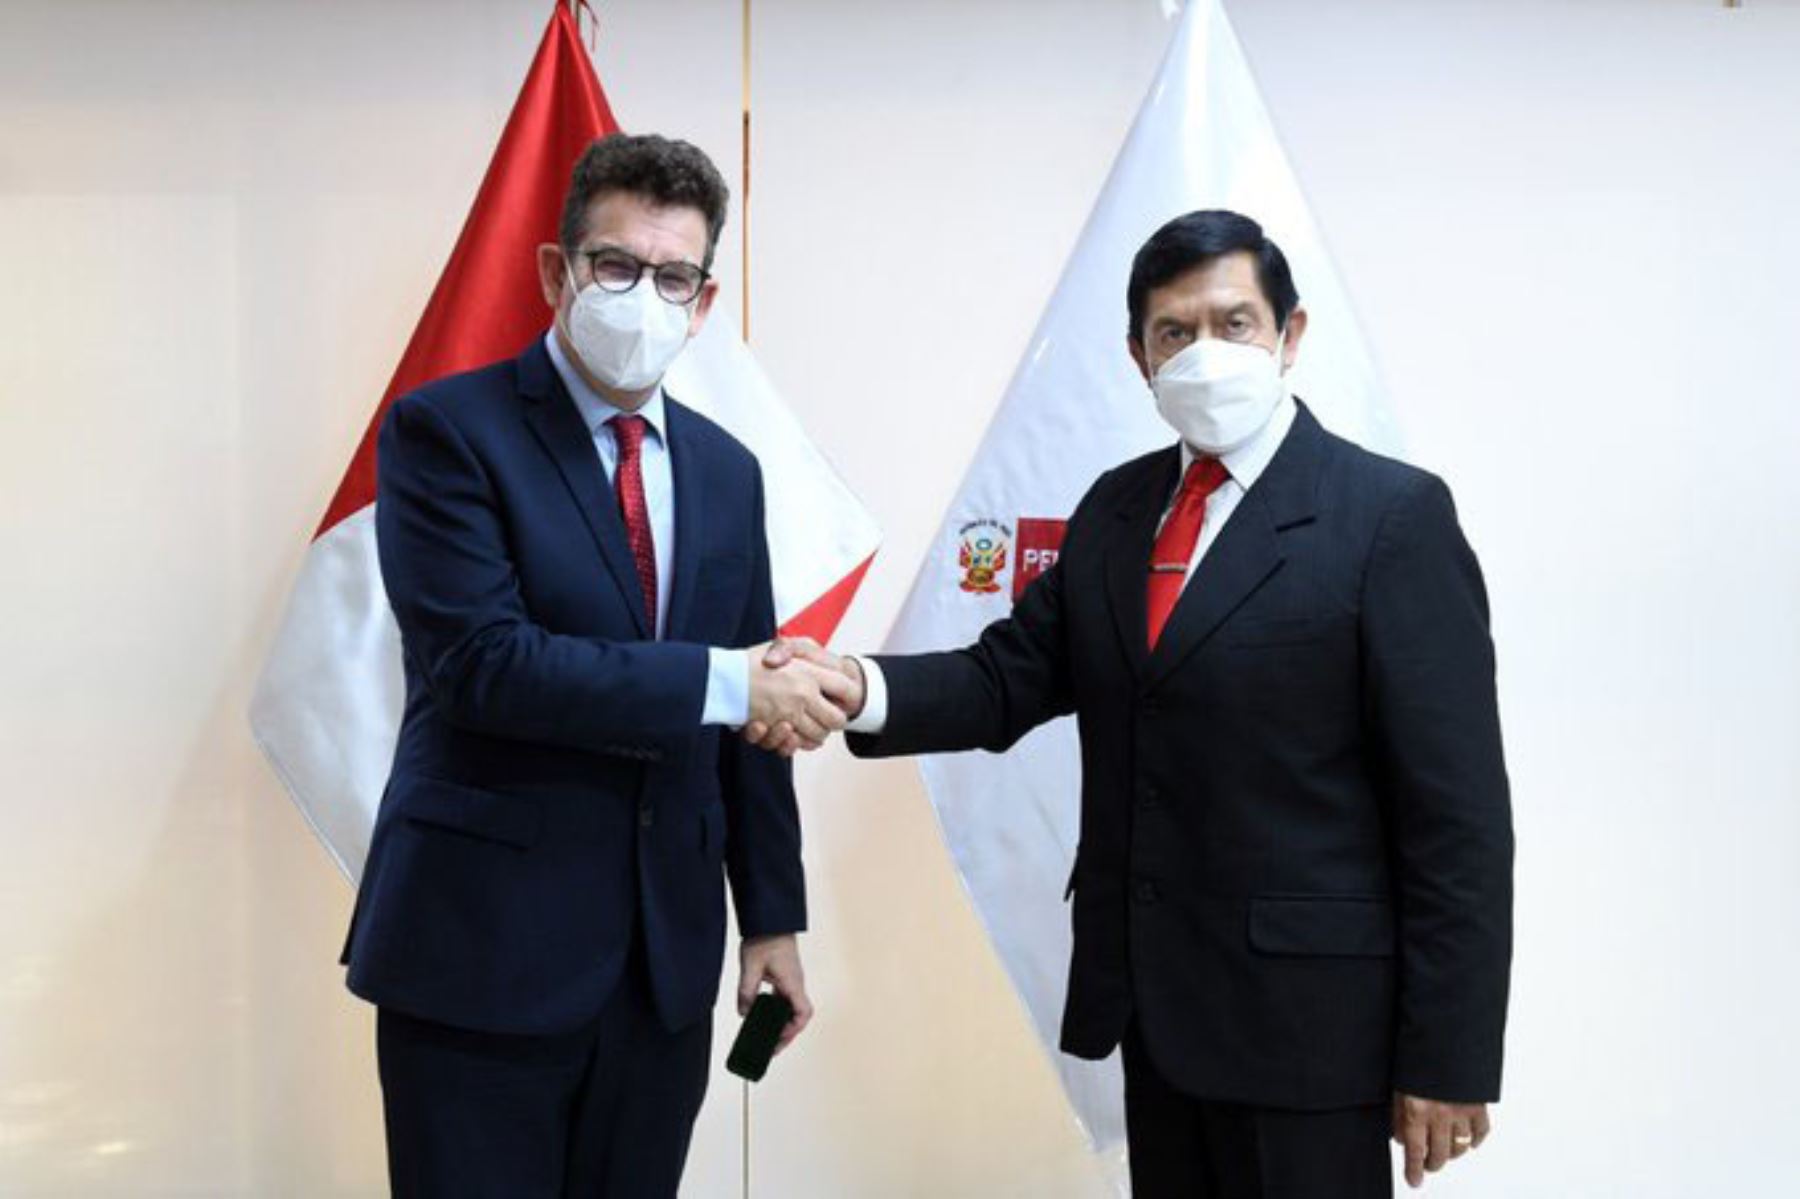 Photo: Twitter/Ministry of Interior of Peru